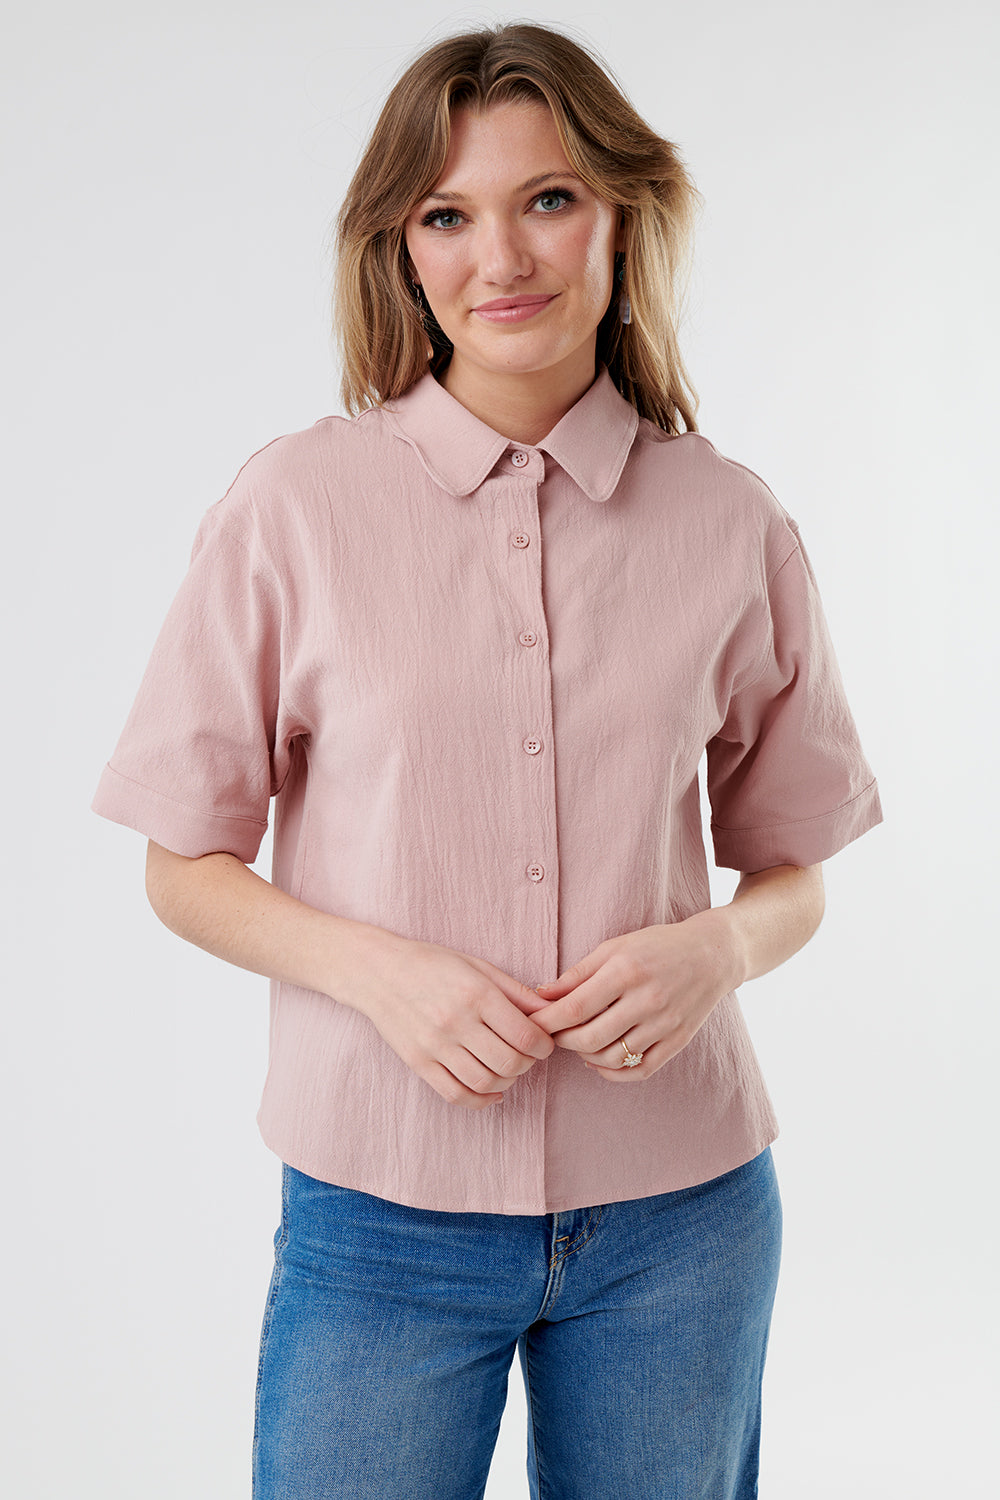 Sunny Bliss Pink Collared Top